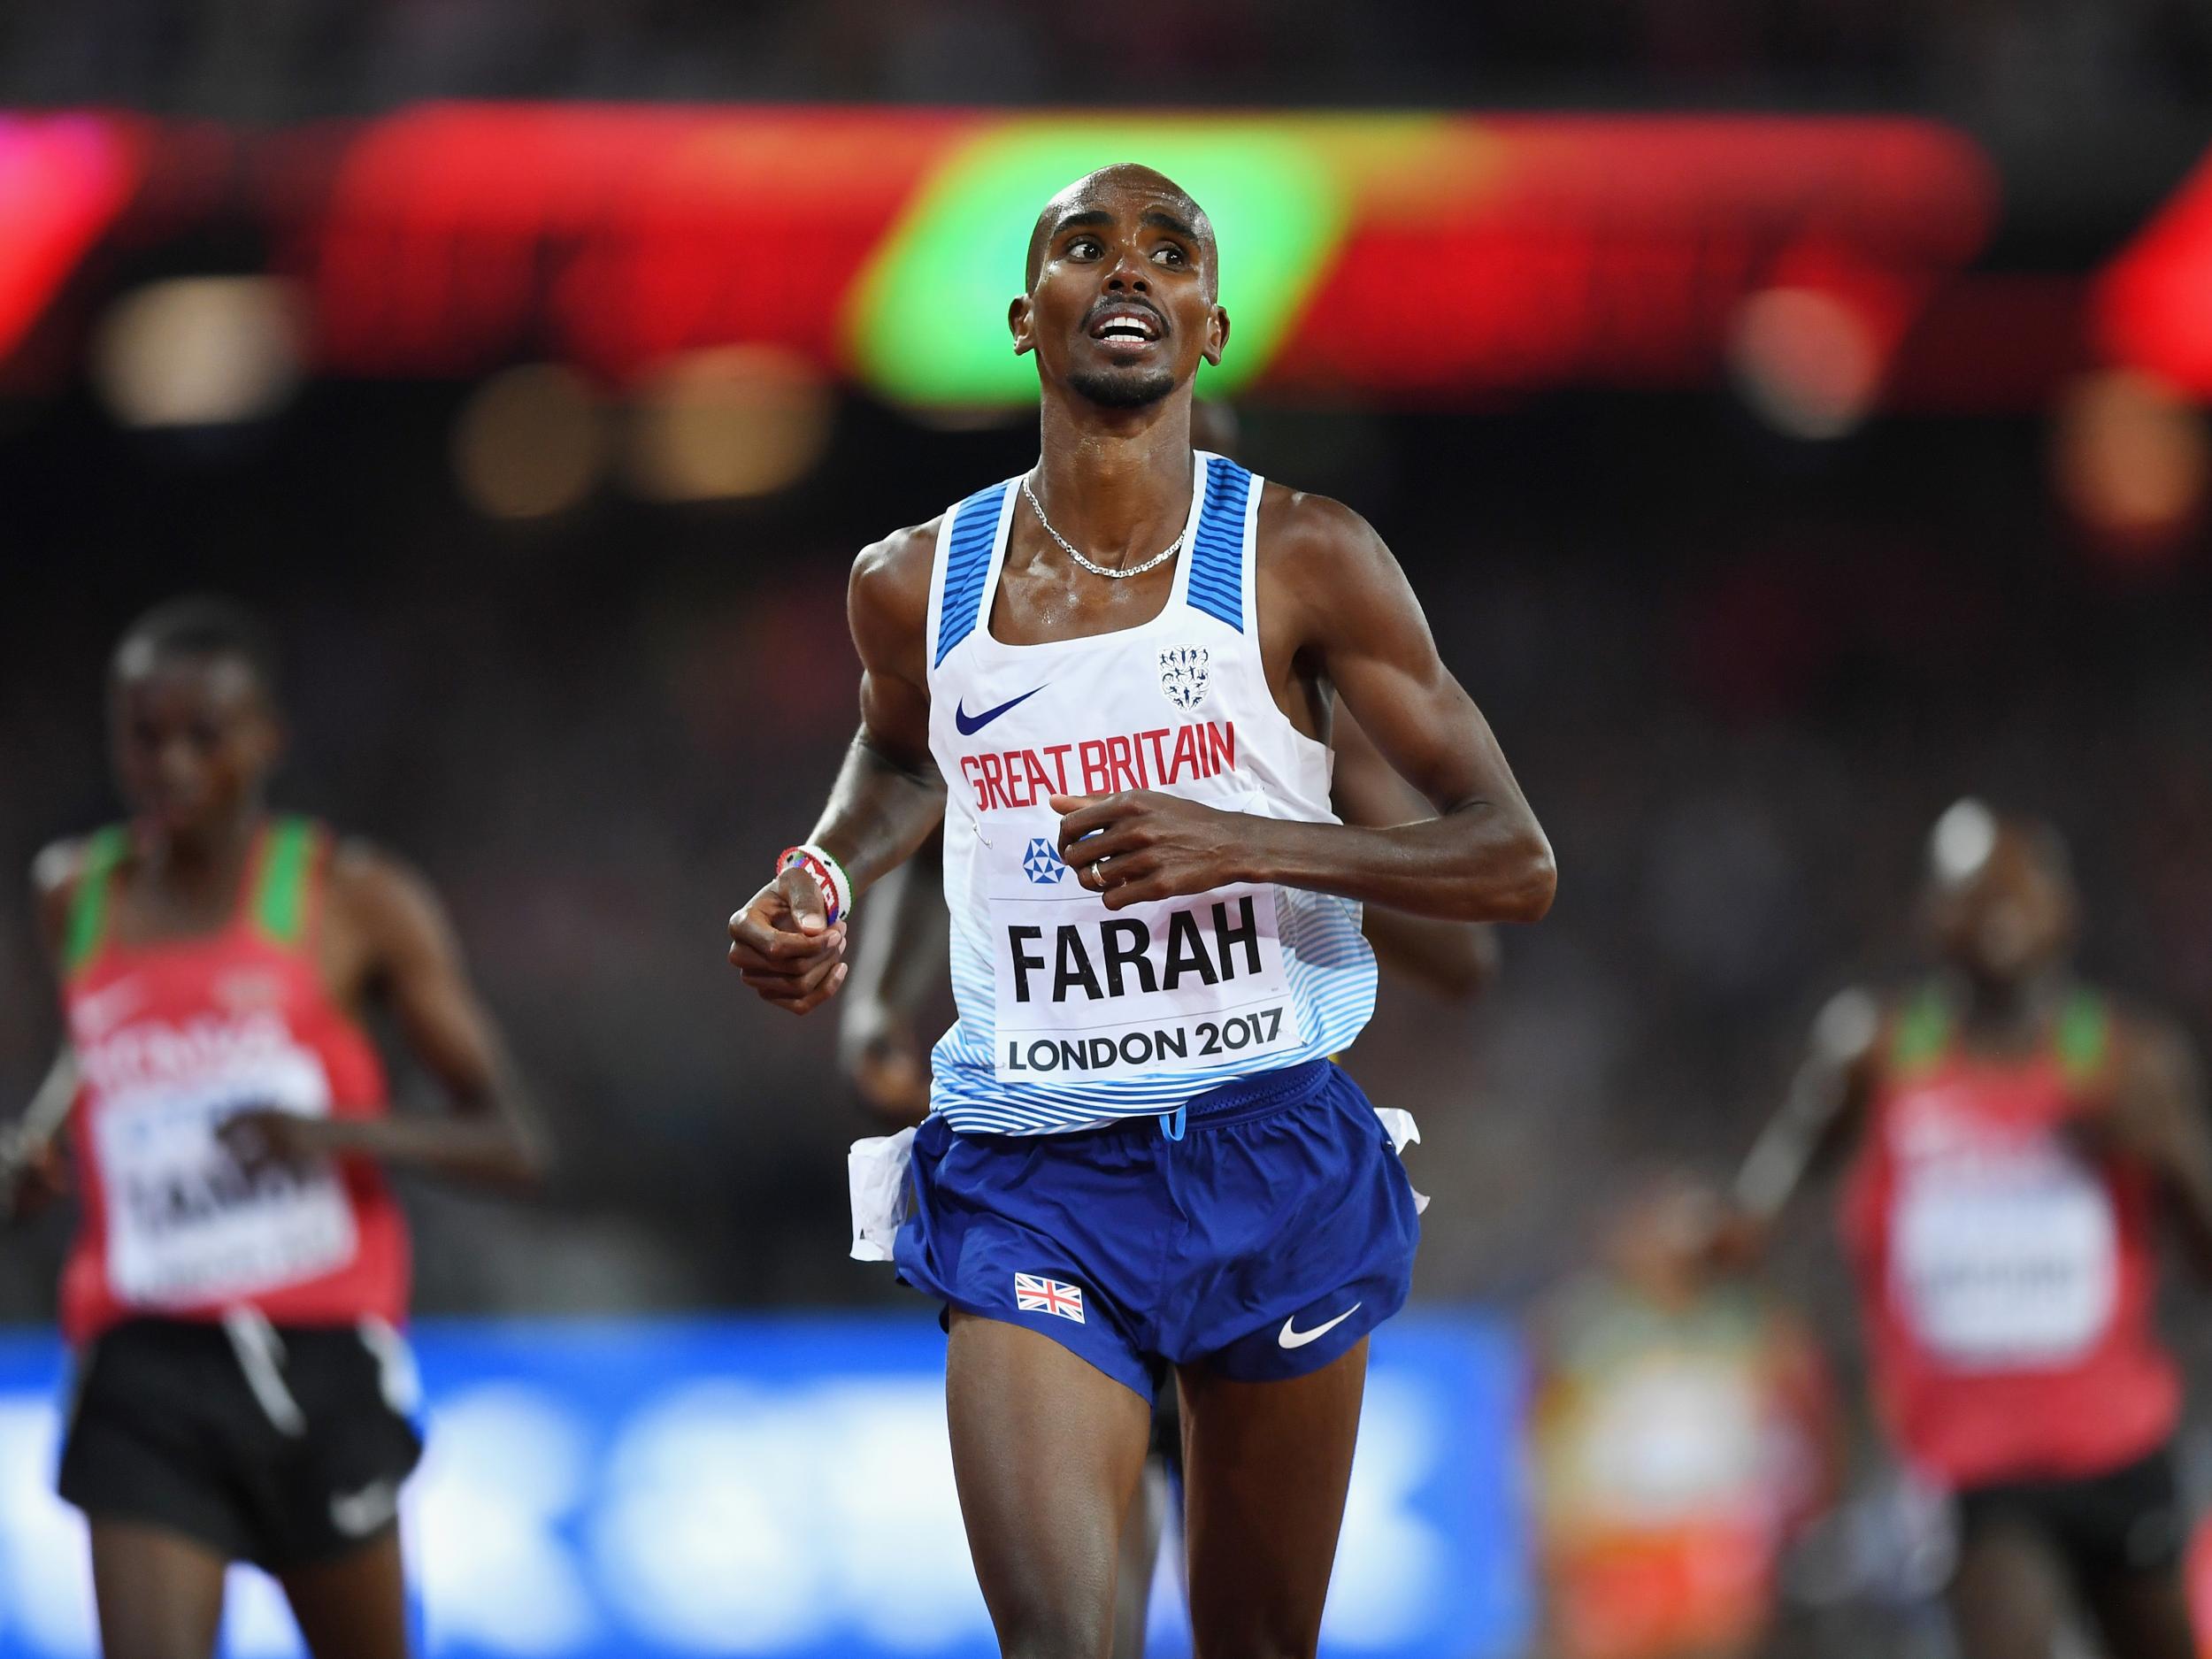 Mo Farah shrugged off a leg injury having been spiked in his 10,000m triumph